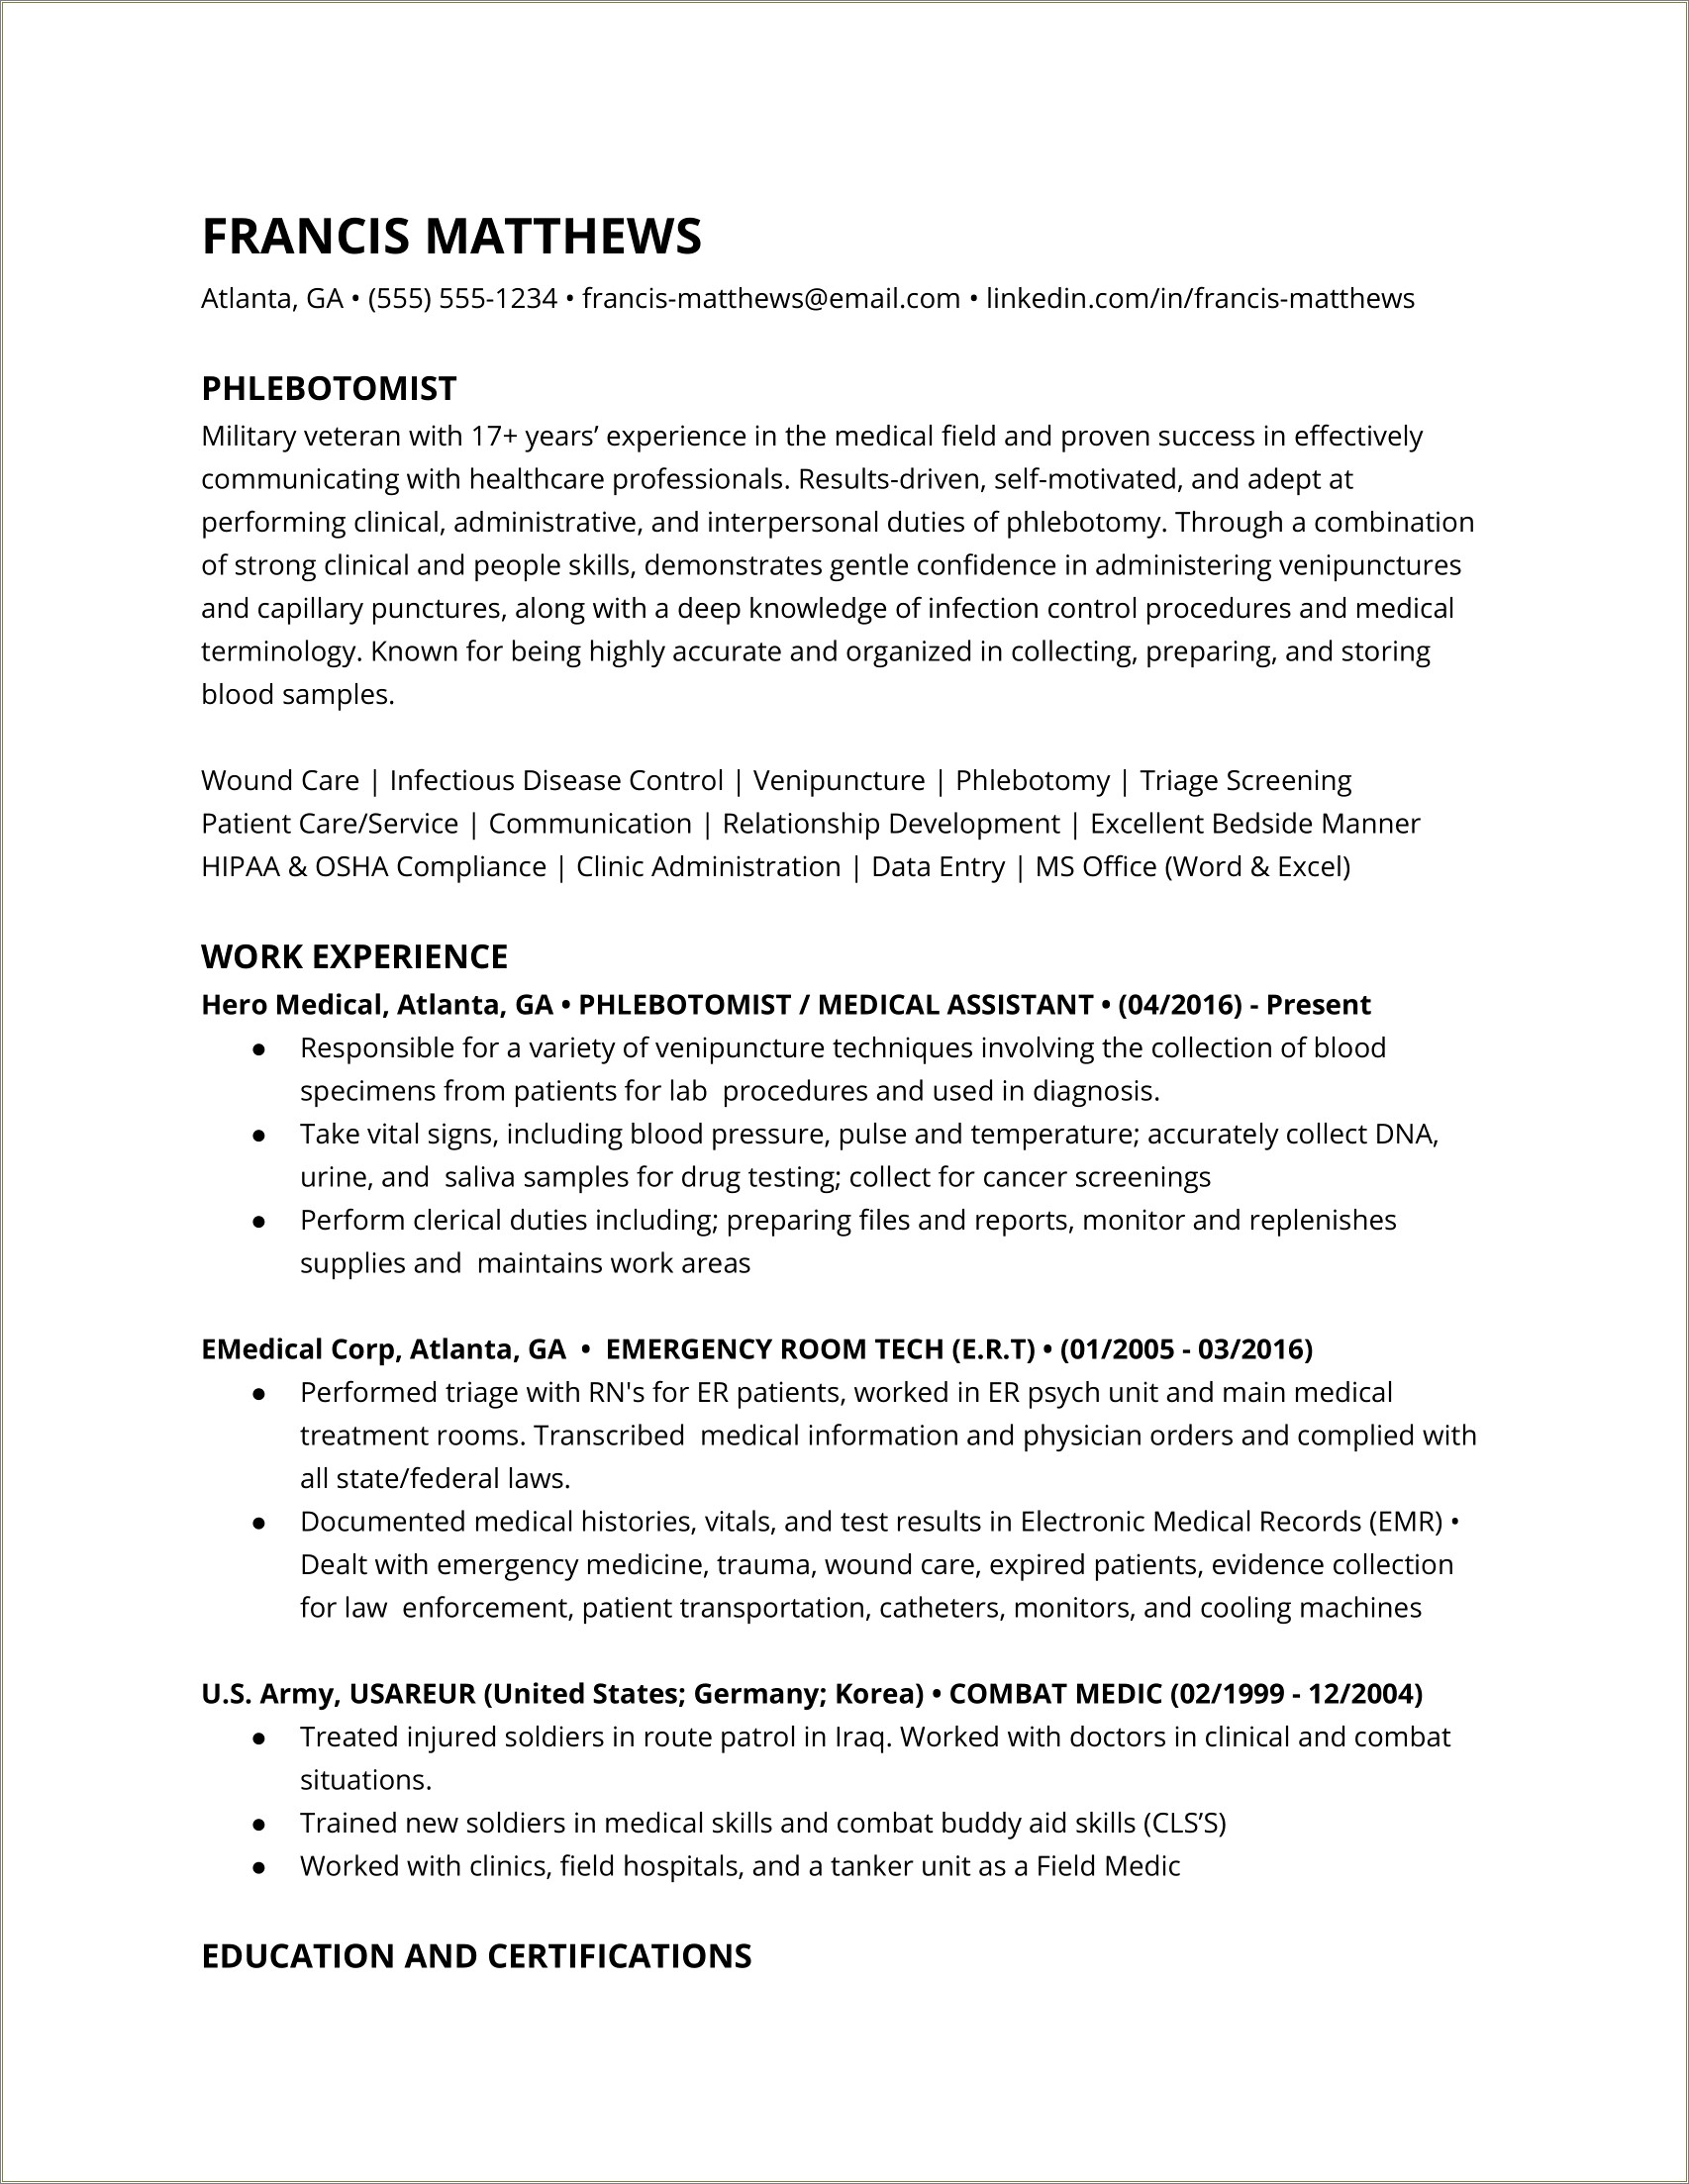 Resume Summary For Medical Laboratory Scientist